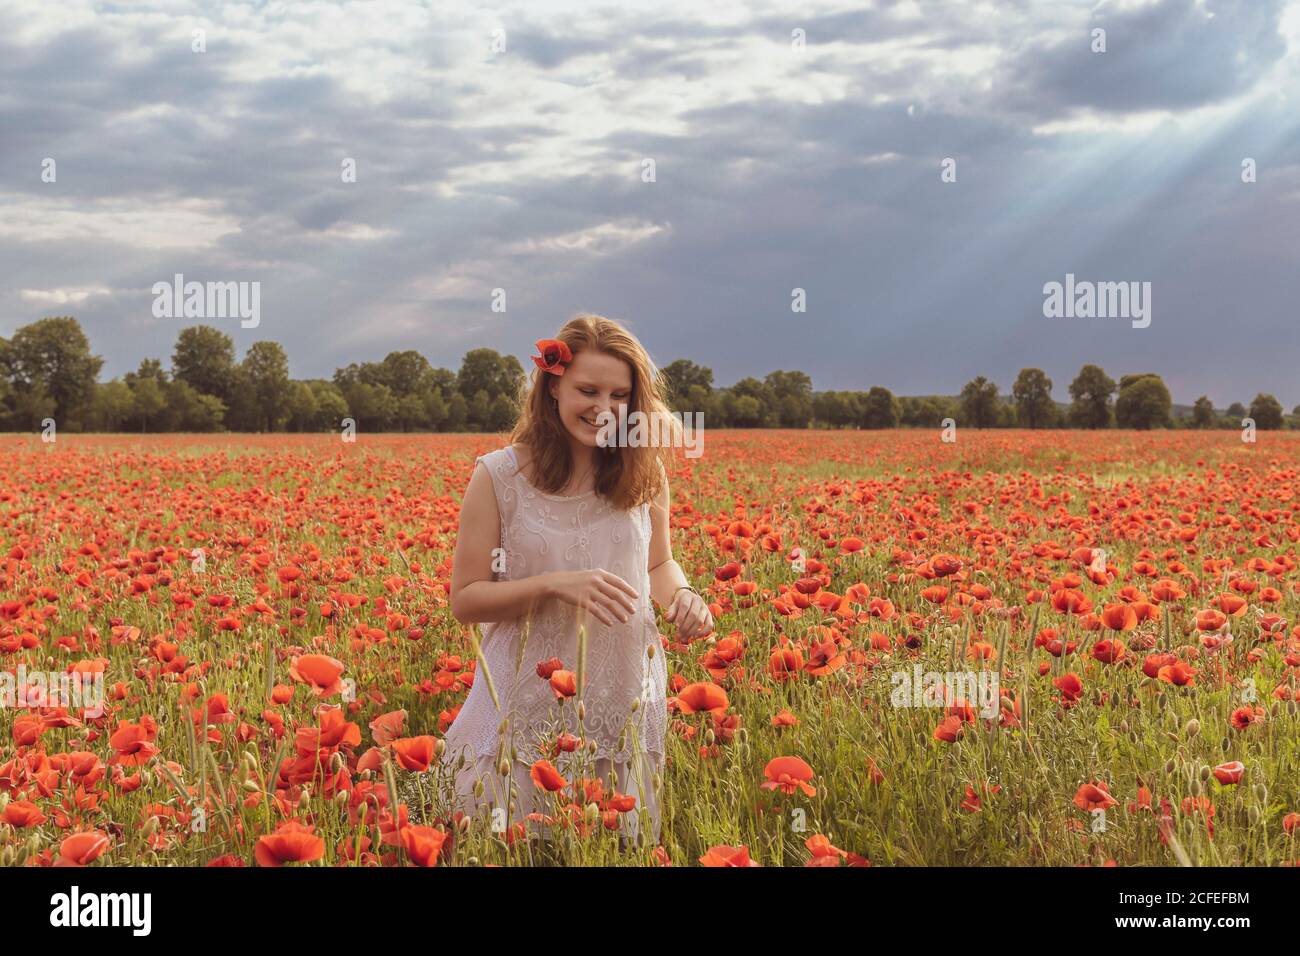 Young girl with reddish hair stands in the huge red poppy field and smiles carefree Stock Photo